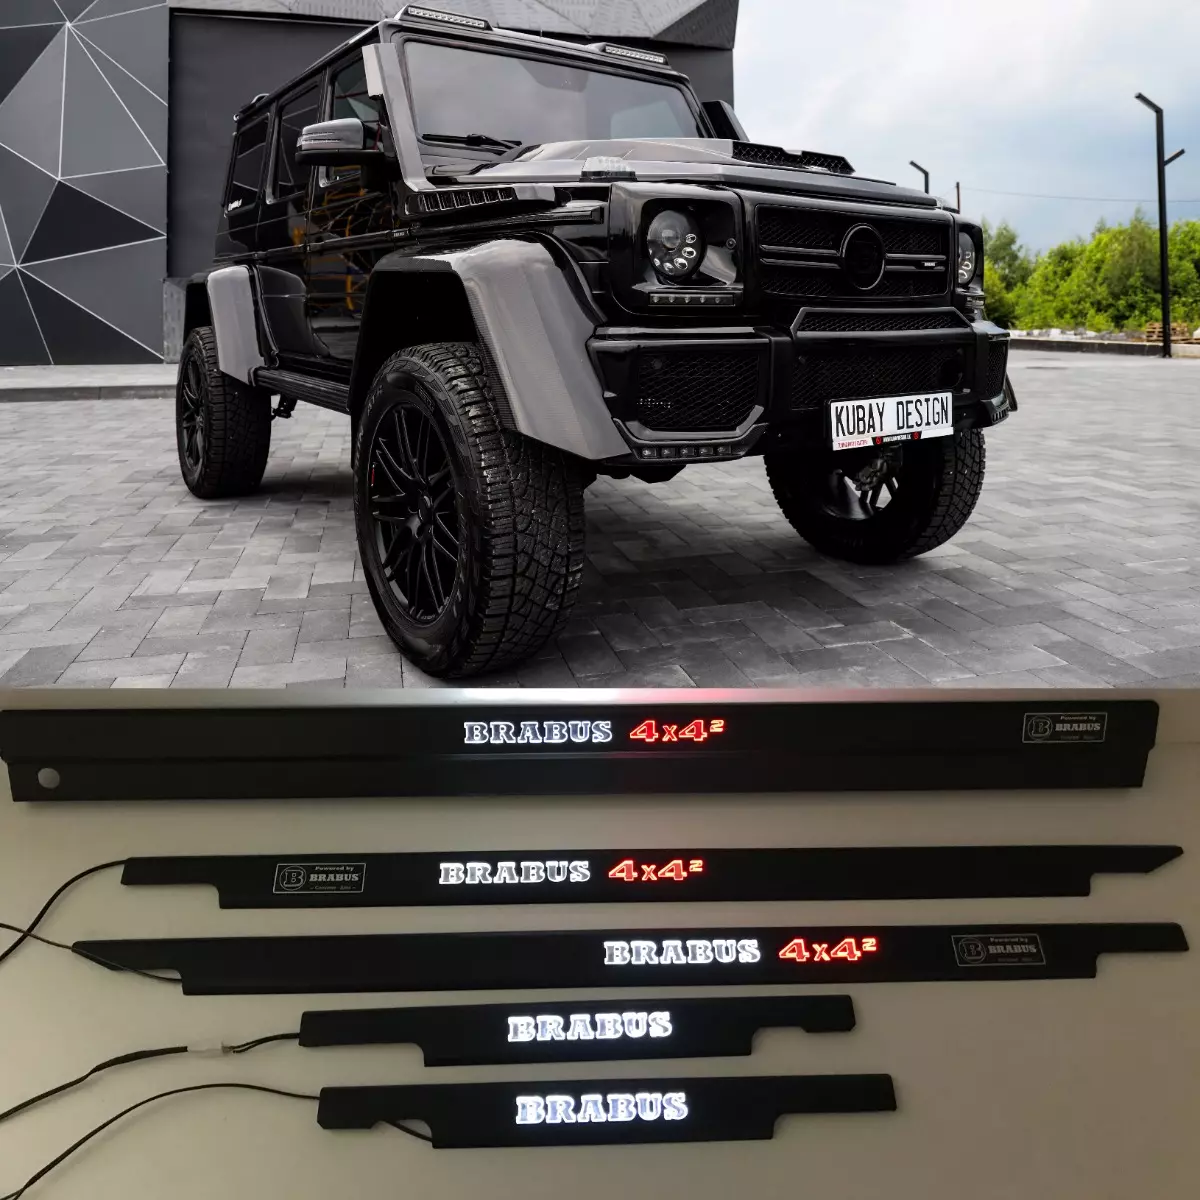 Brabus 4x4 Squared Stainless Steel LED Door Sills Set 5 pcs for W463 G-Class Mercedes-Benz